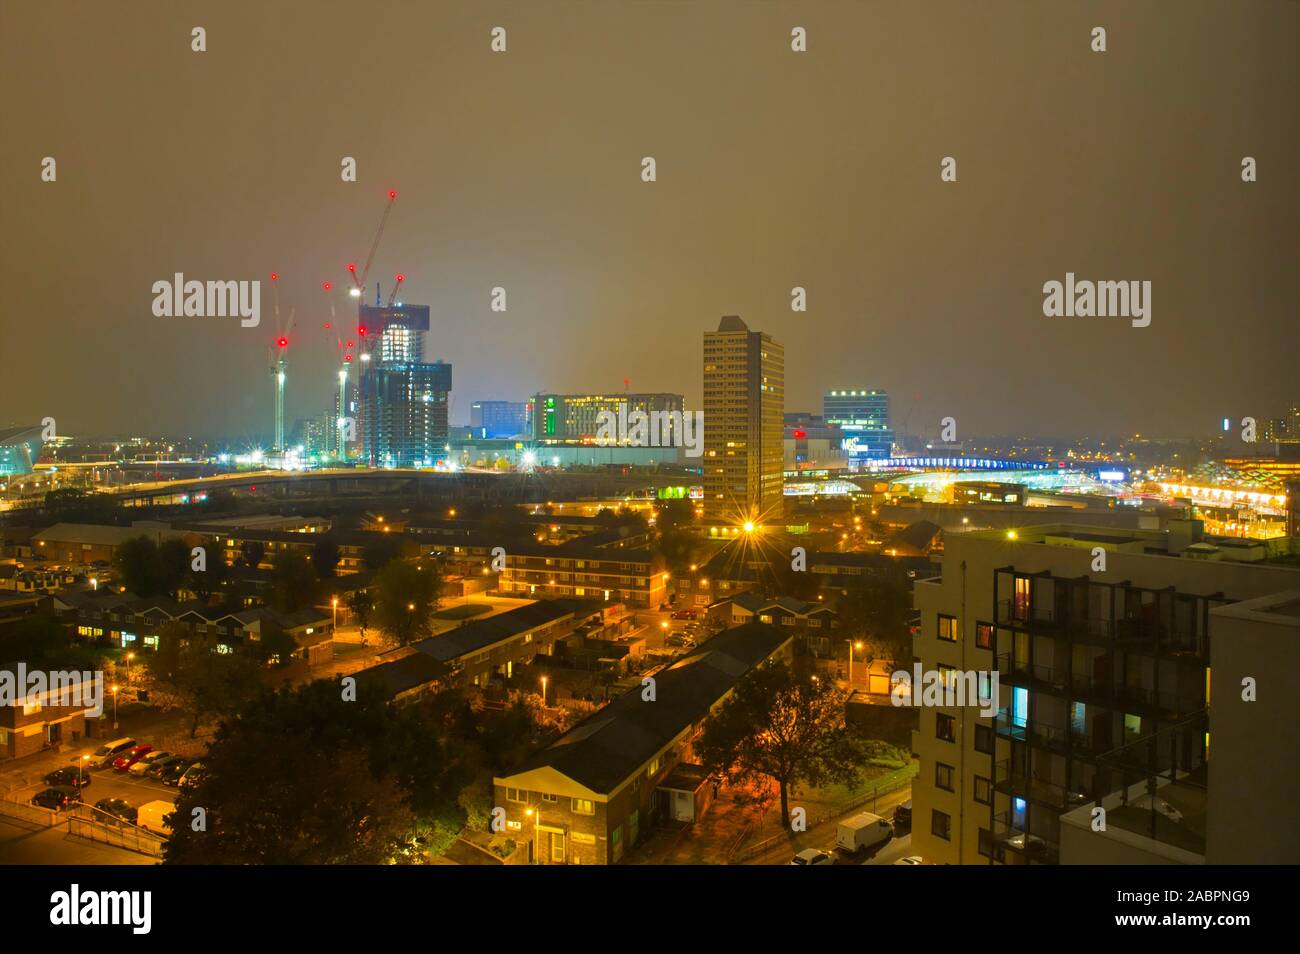 A view across Stratford, London with Westfield Shopping centre illuminated in the background. Stock Photo